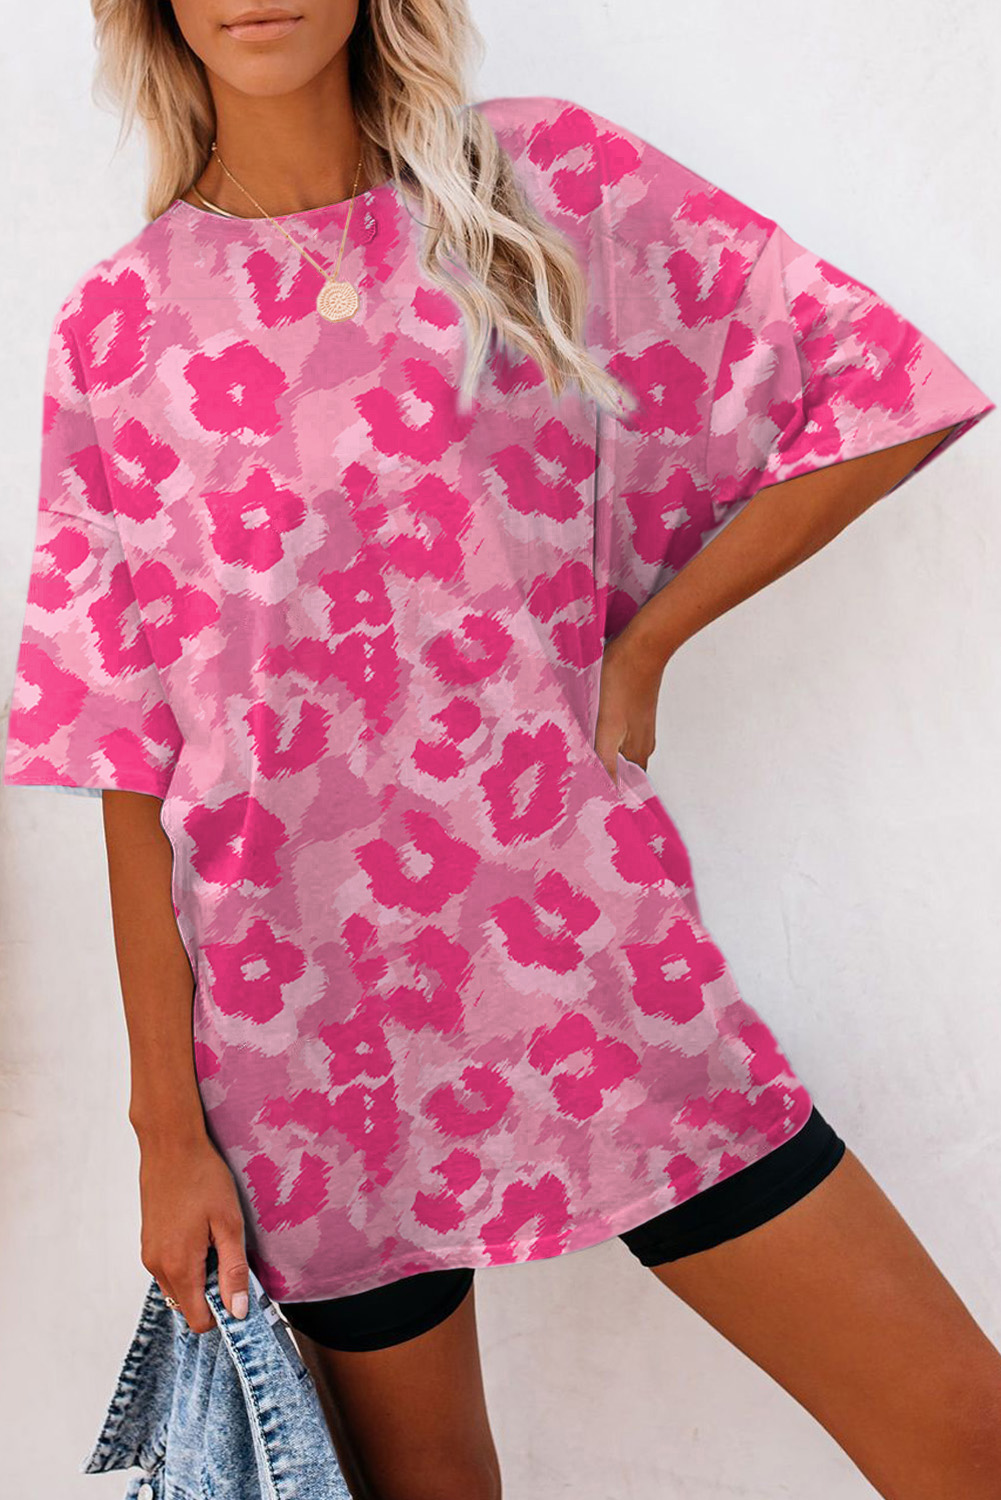 Shewin Wholesale CLOTHING Vendors Pink Leopard Print Drop Sleeve Oversized T Shirt